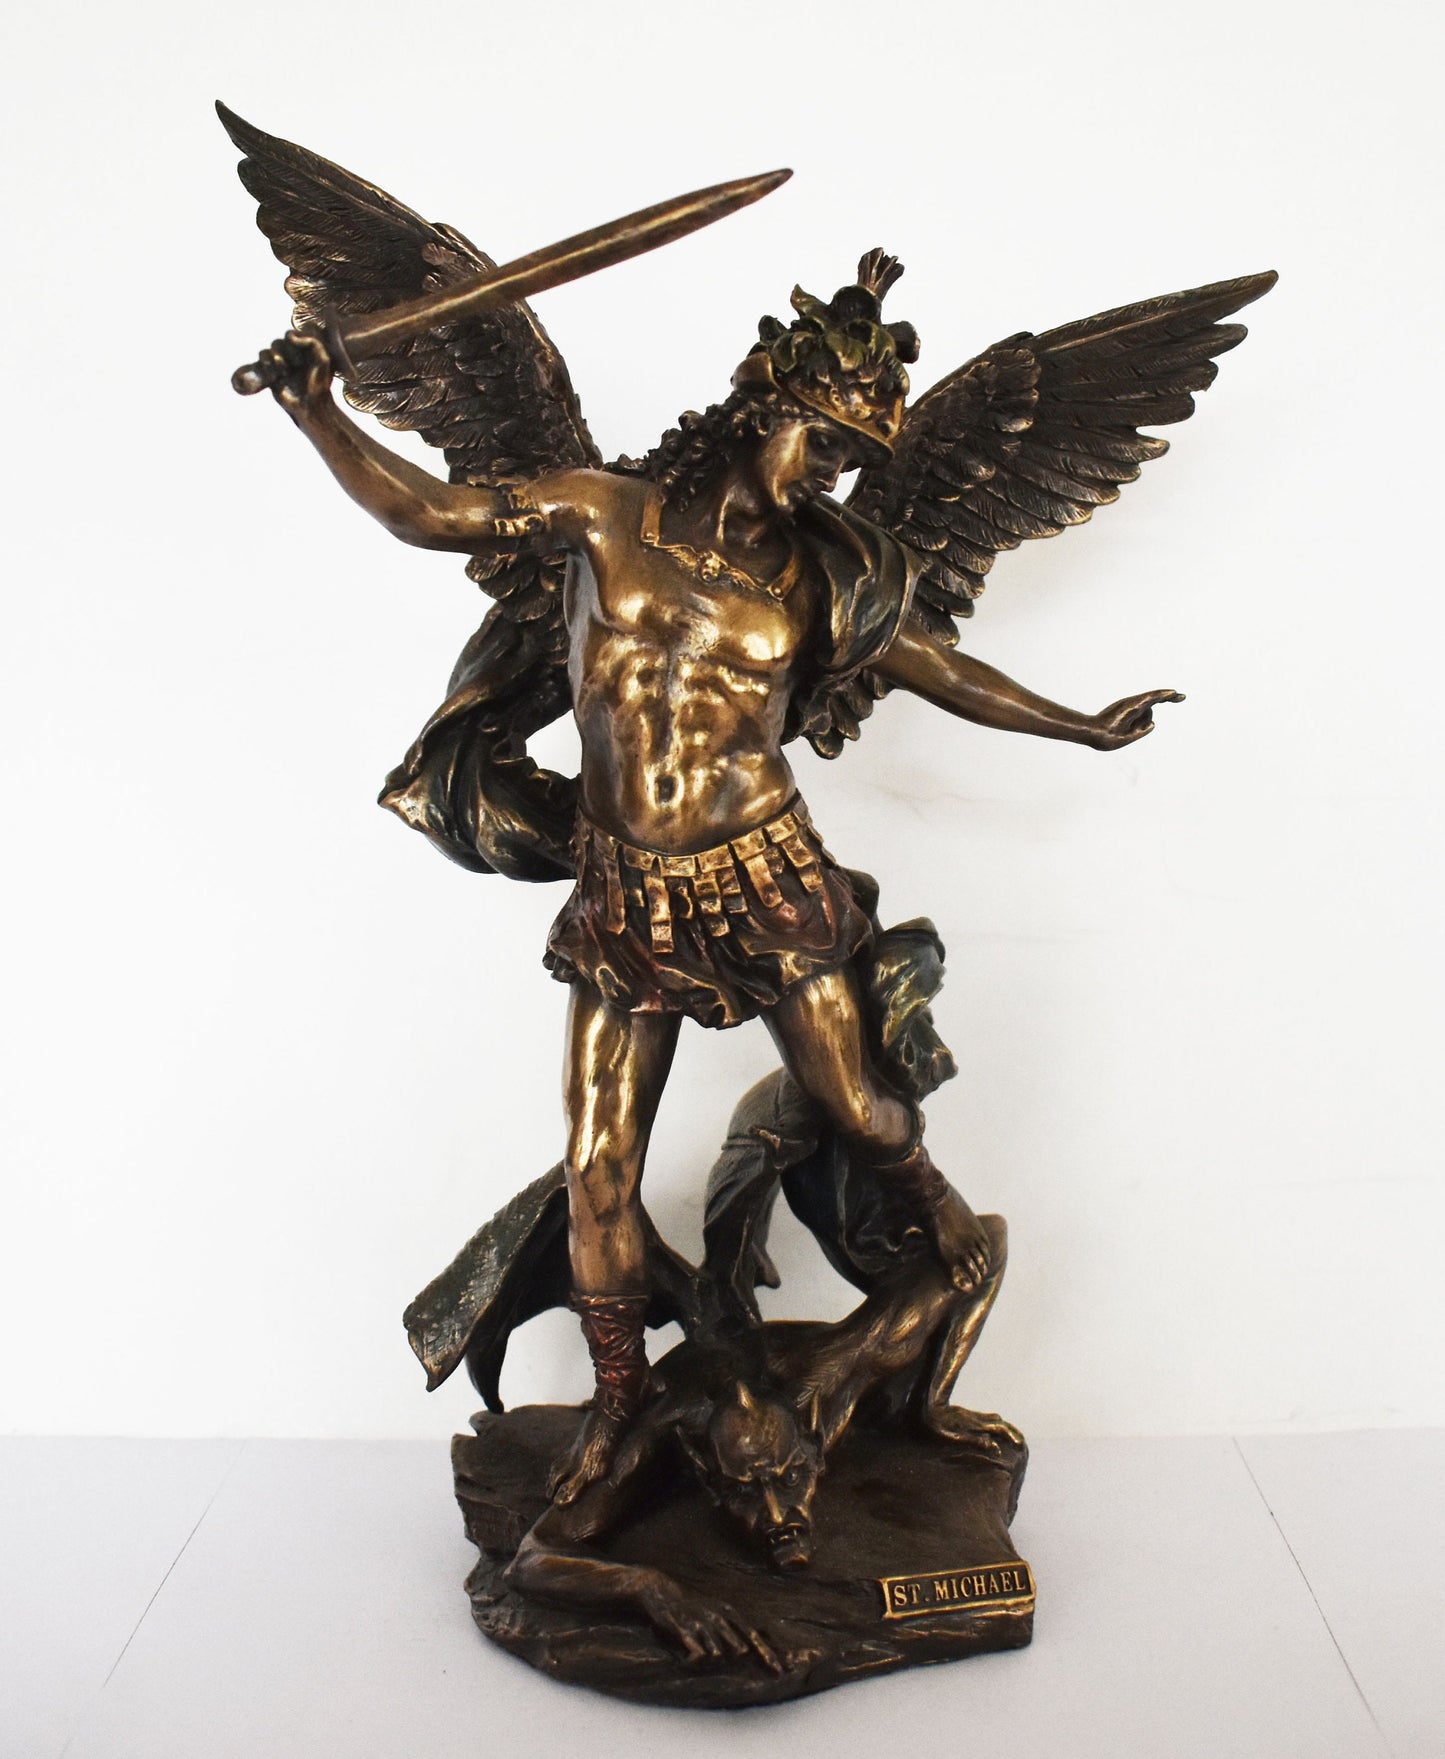 Archangel Michael - Leader of God's Armies against Satan's Forces in the Book of Revelation - Cold Cast Bronze Resin